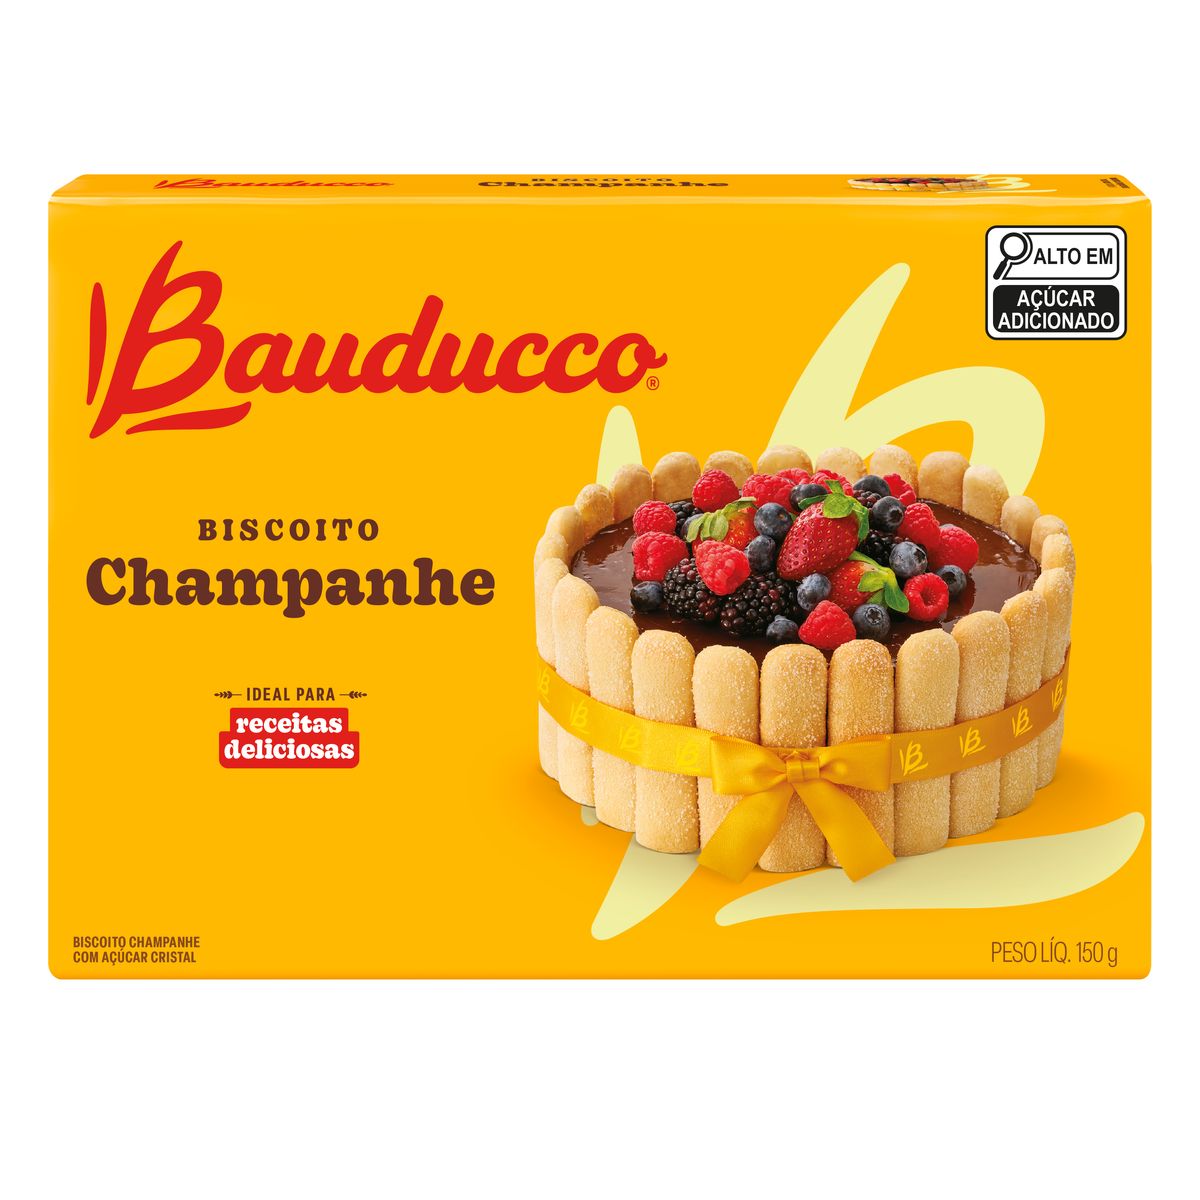 Biscoito Champagne Bauducco Caixa 150g image number 0